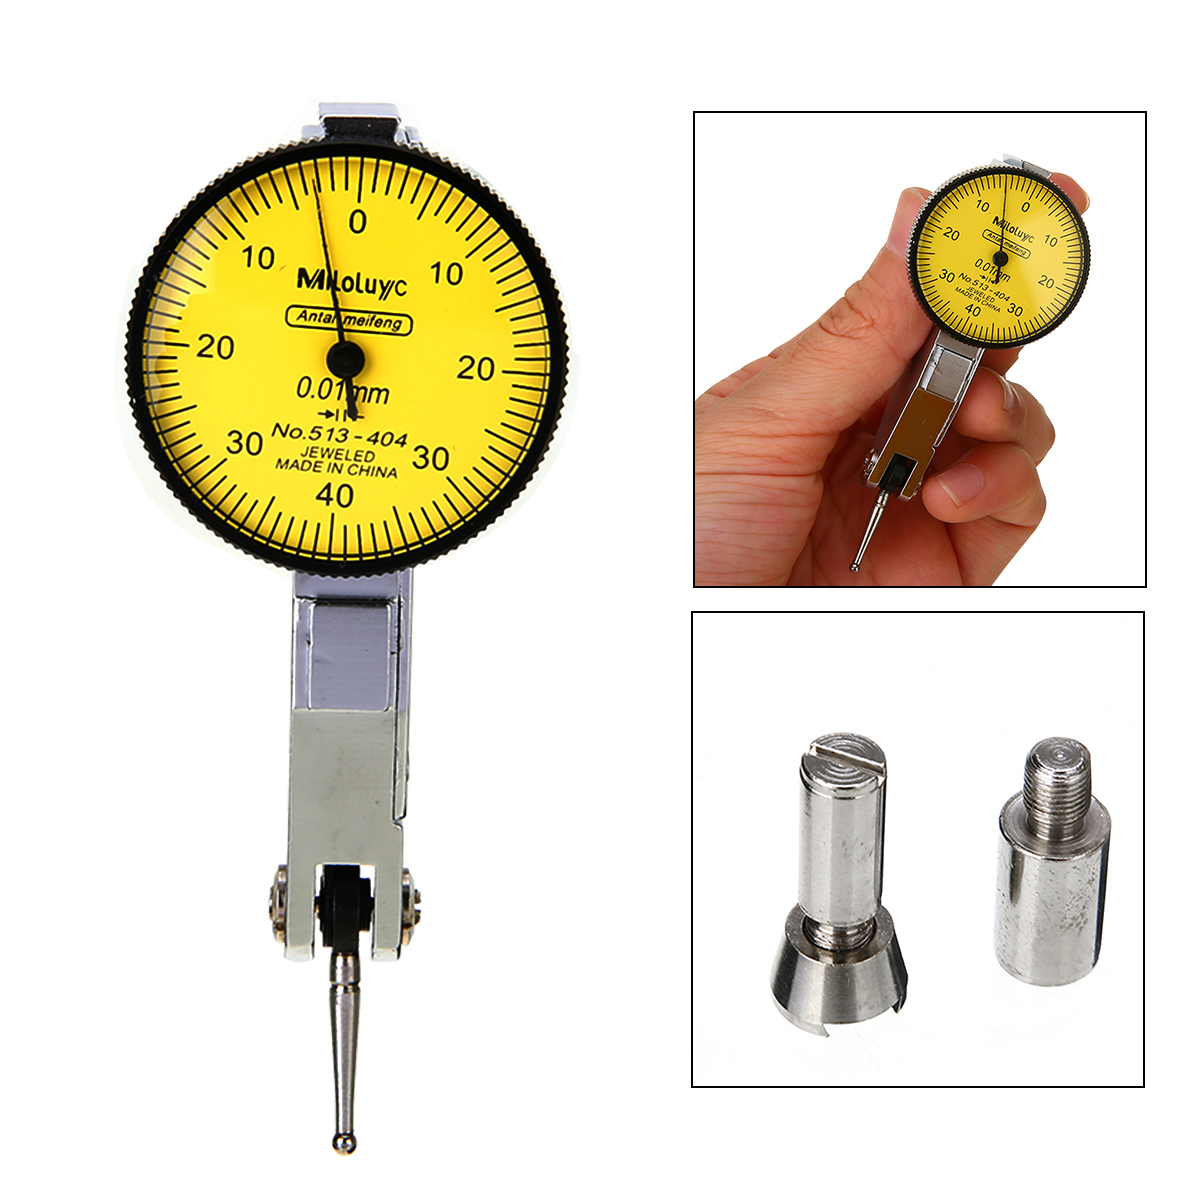 Dial Test Indicator Tools 0.01mm Accuracy Precision High Quality Durable 